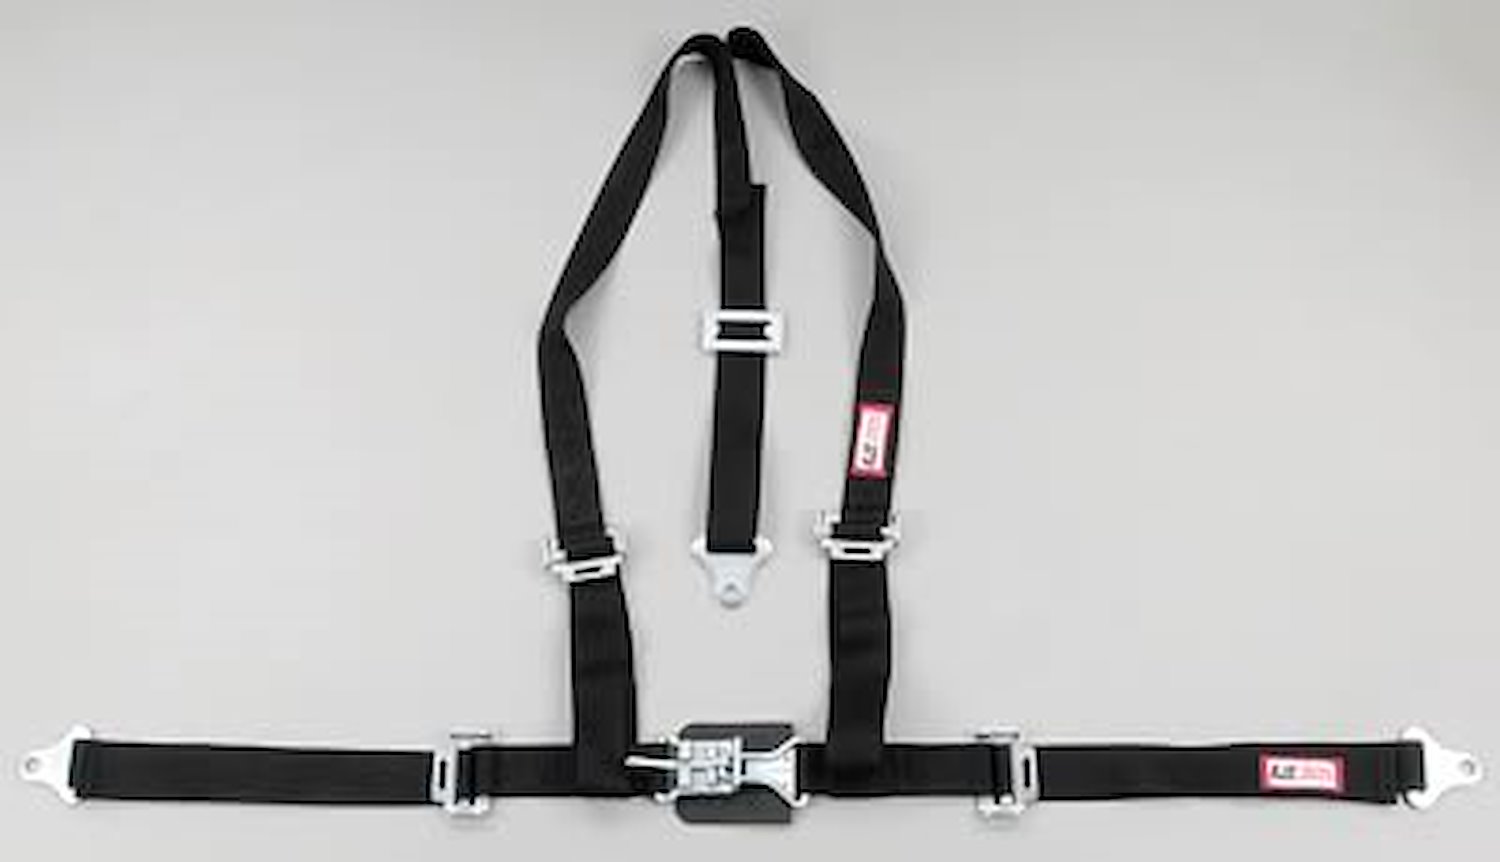 NON-SFI L&L HARNESS 3 PULL UP Lap Belt SNAP SEWN IN 2 S.H. Individual ROLL BAR Mount WRAP/BOLT GRAY